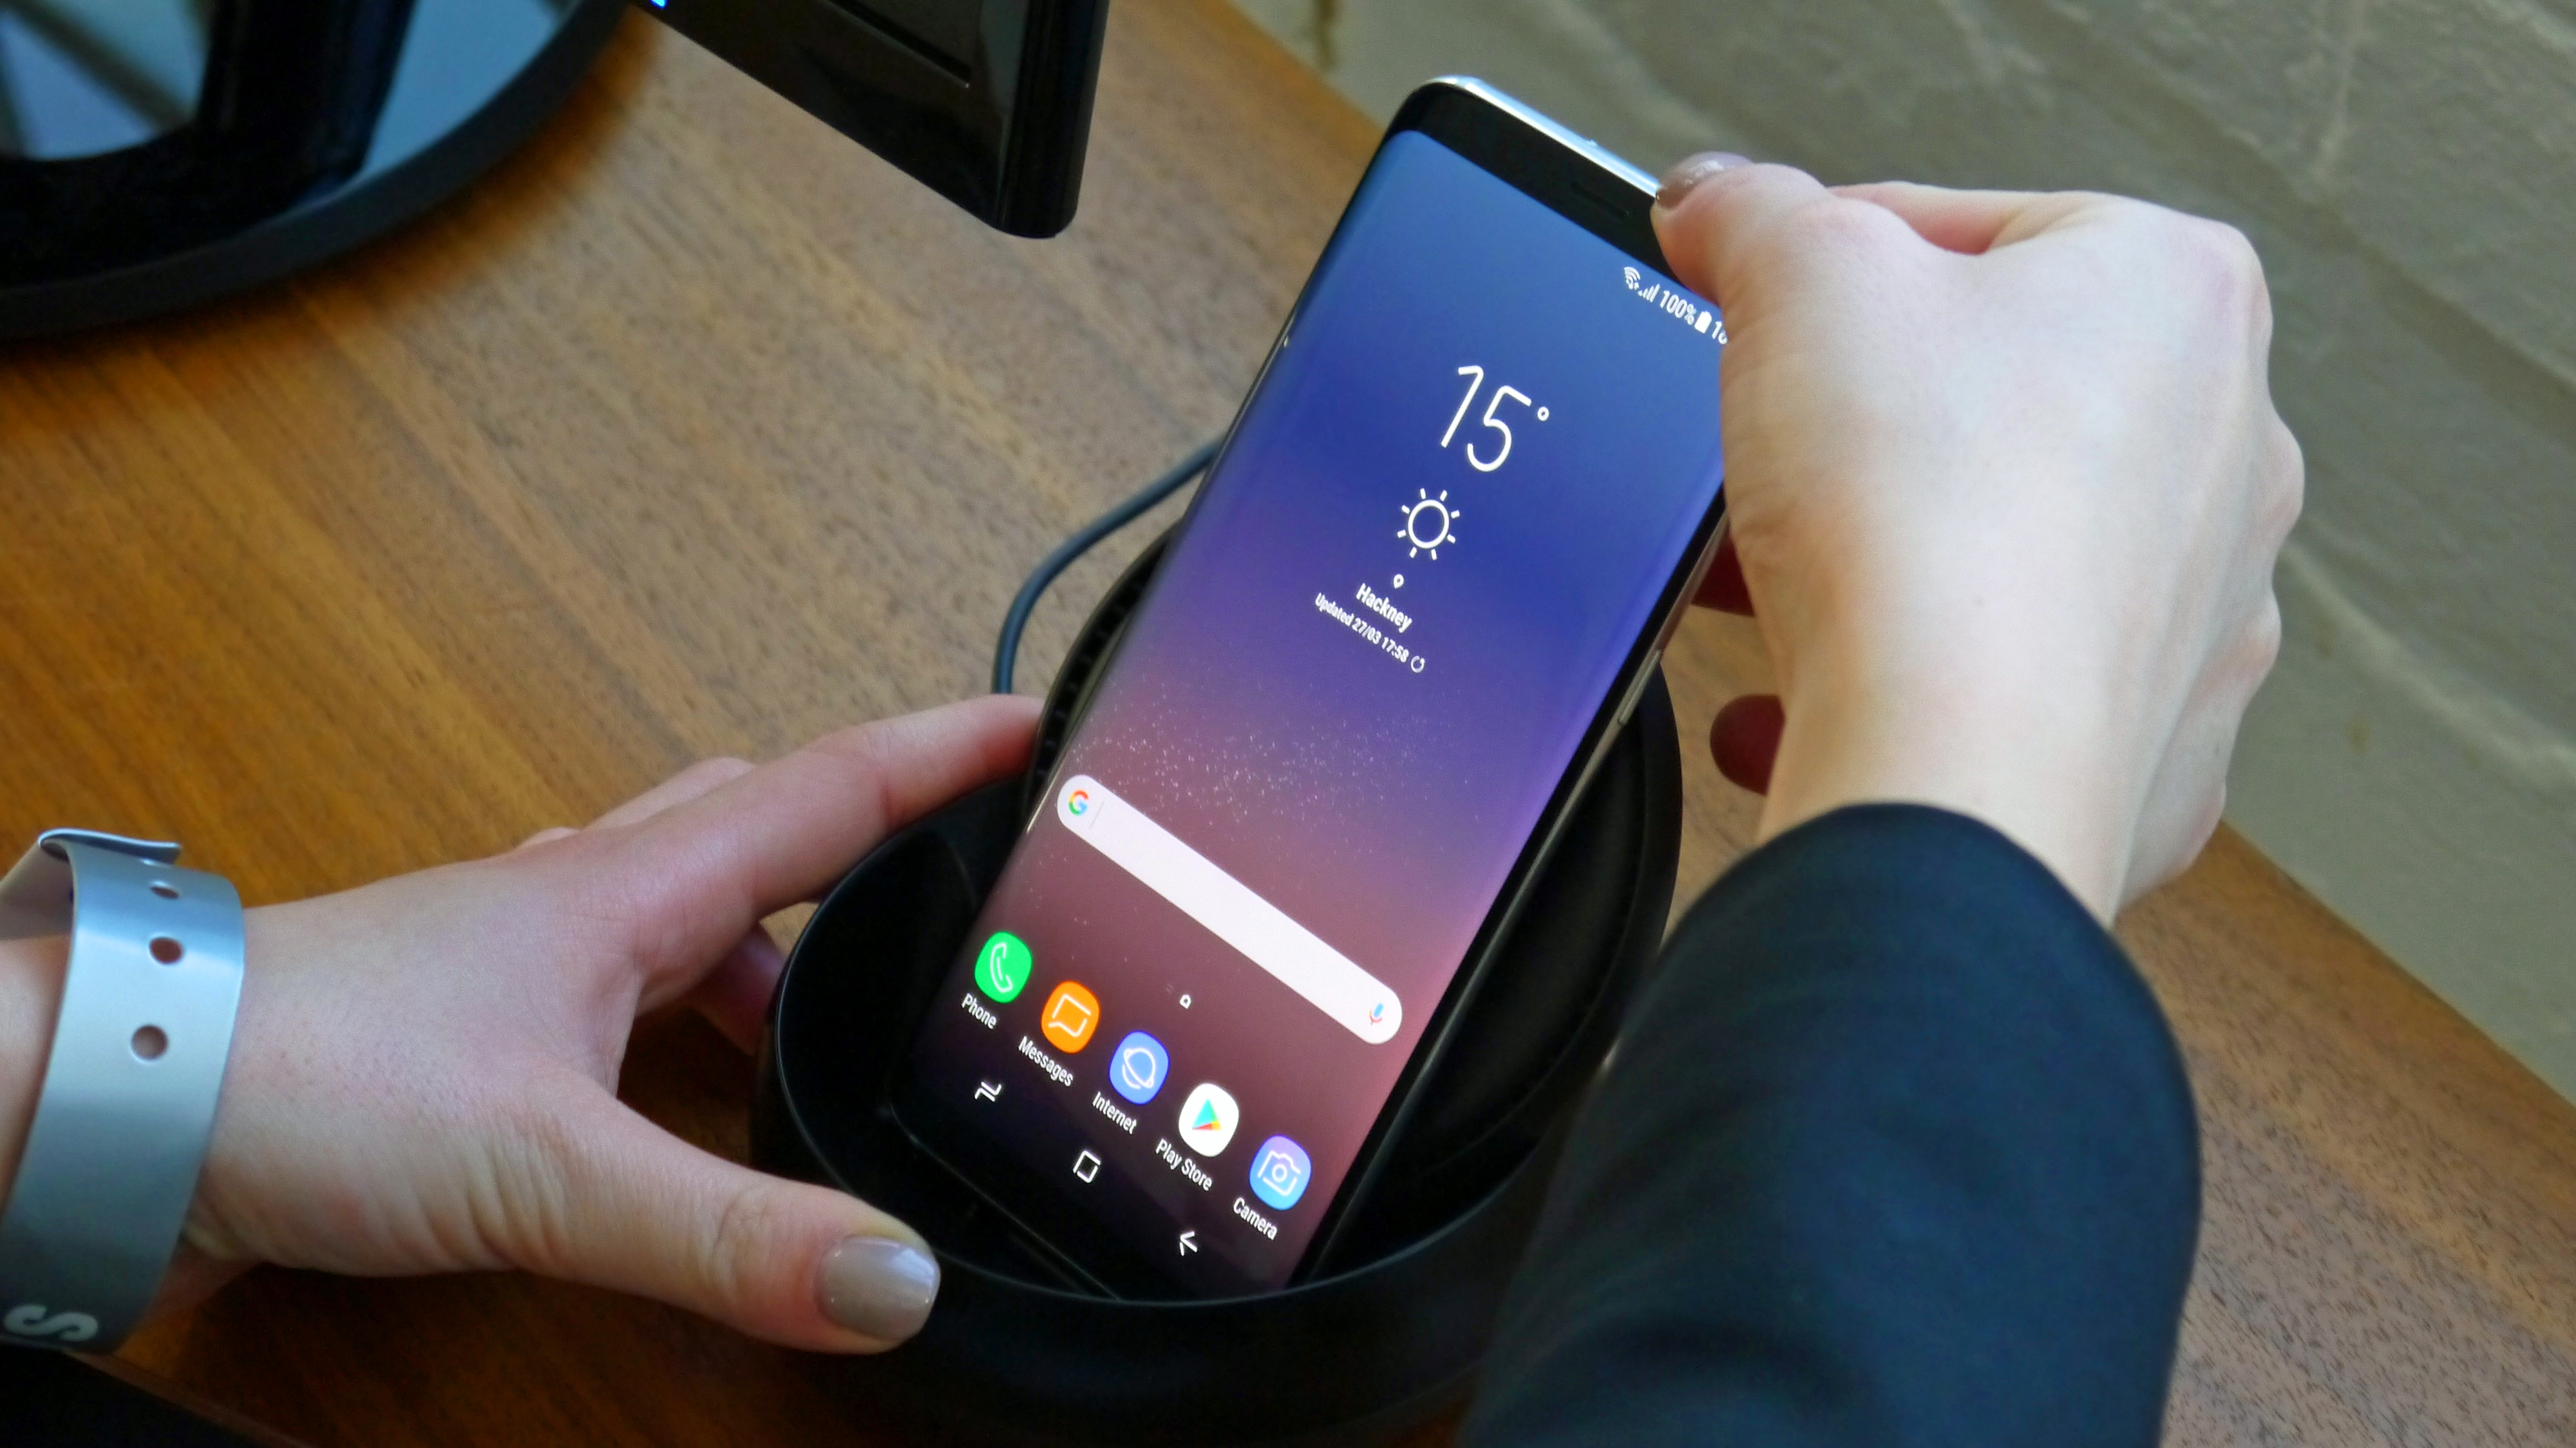 Samsung Galaxy S8 showing home screen in hand